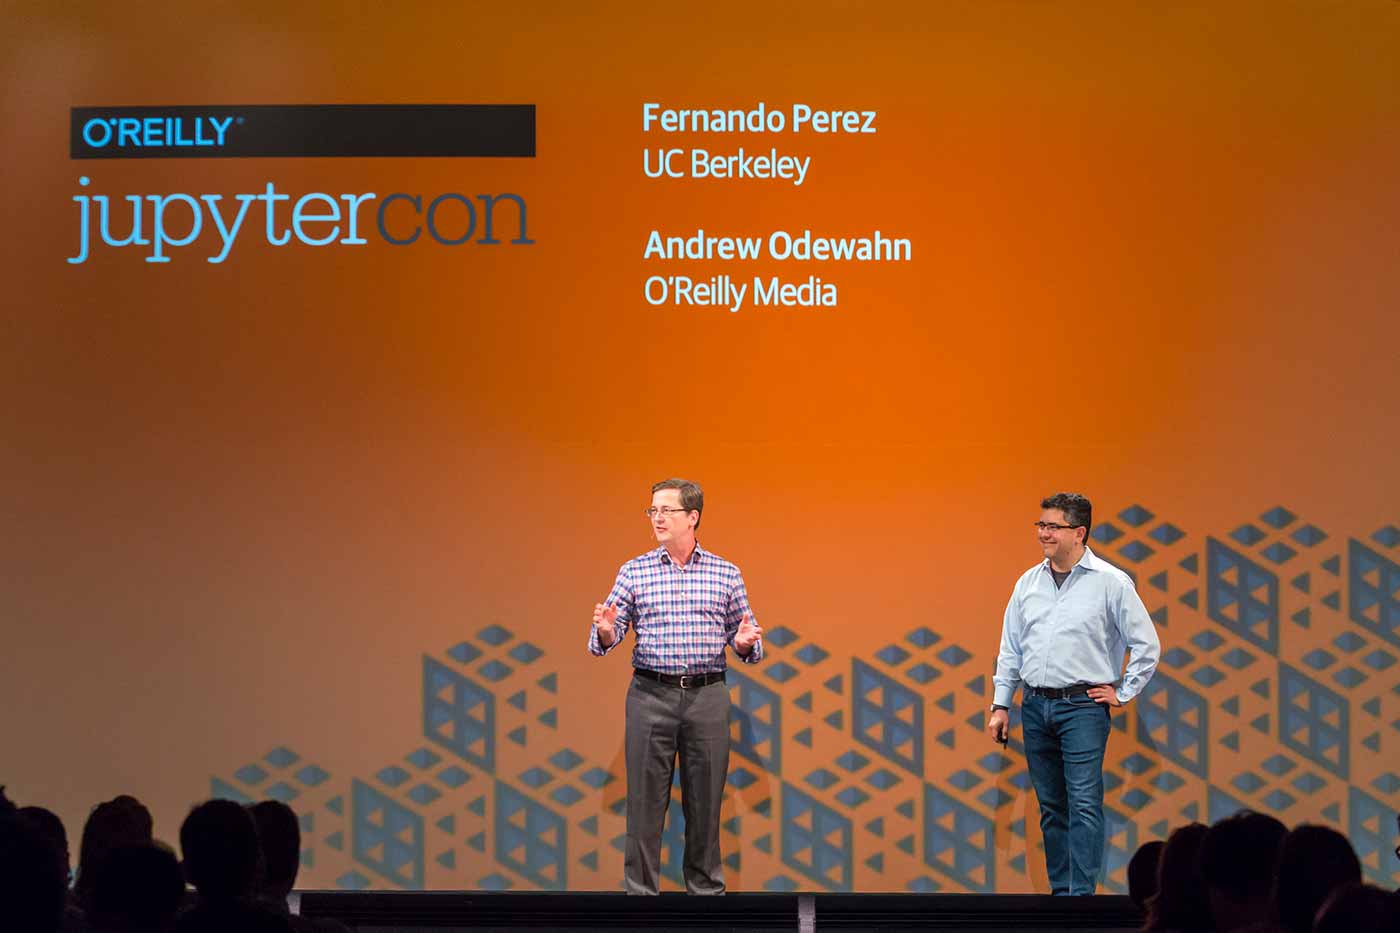 Andrew Odewahn (left) and Fernando Perez (right) at JupyterCon in New York 2017